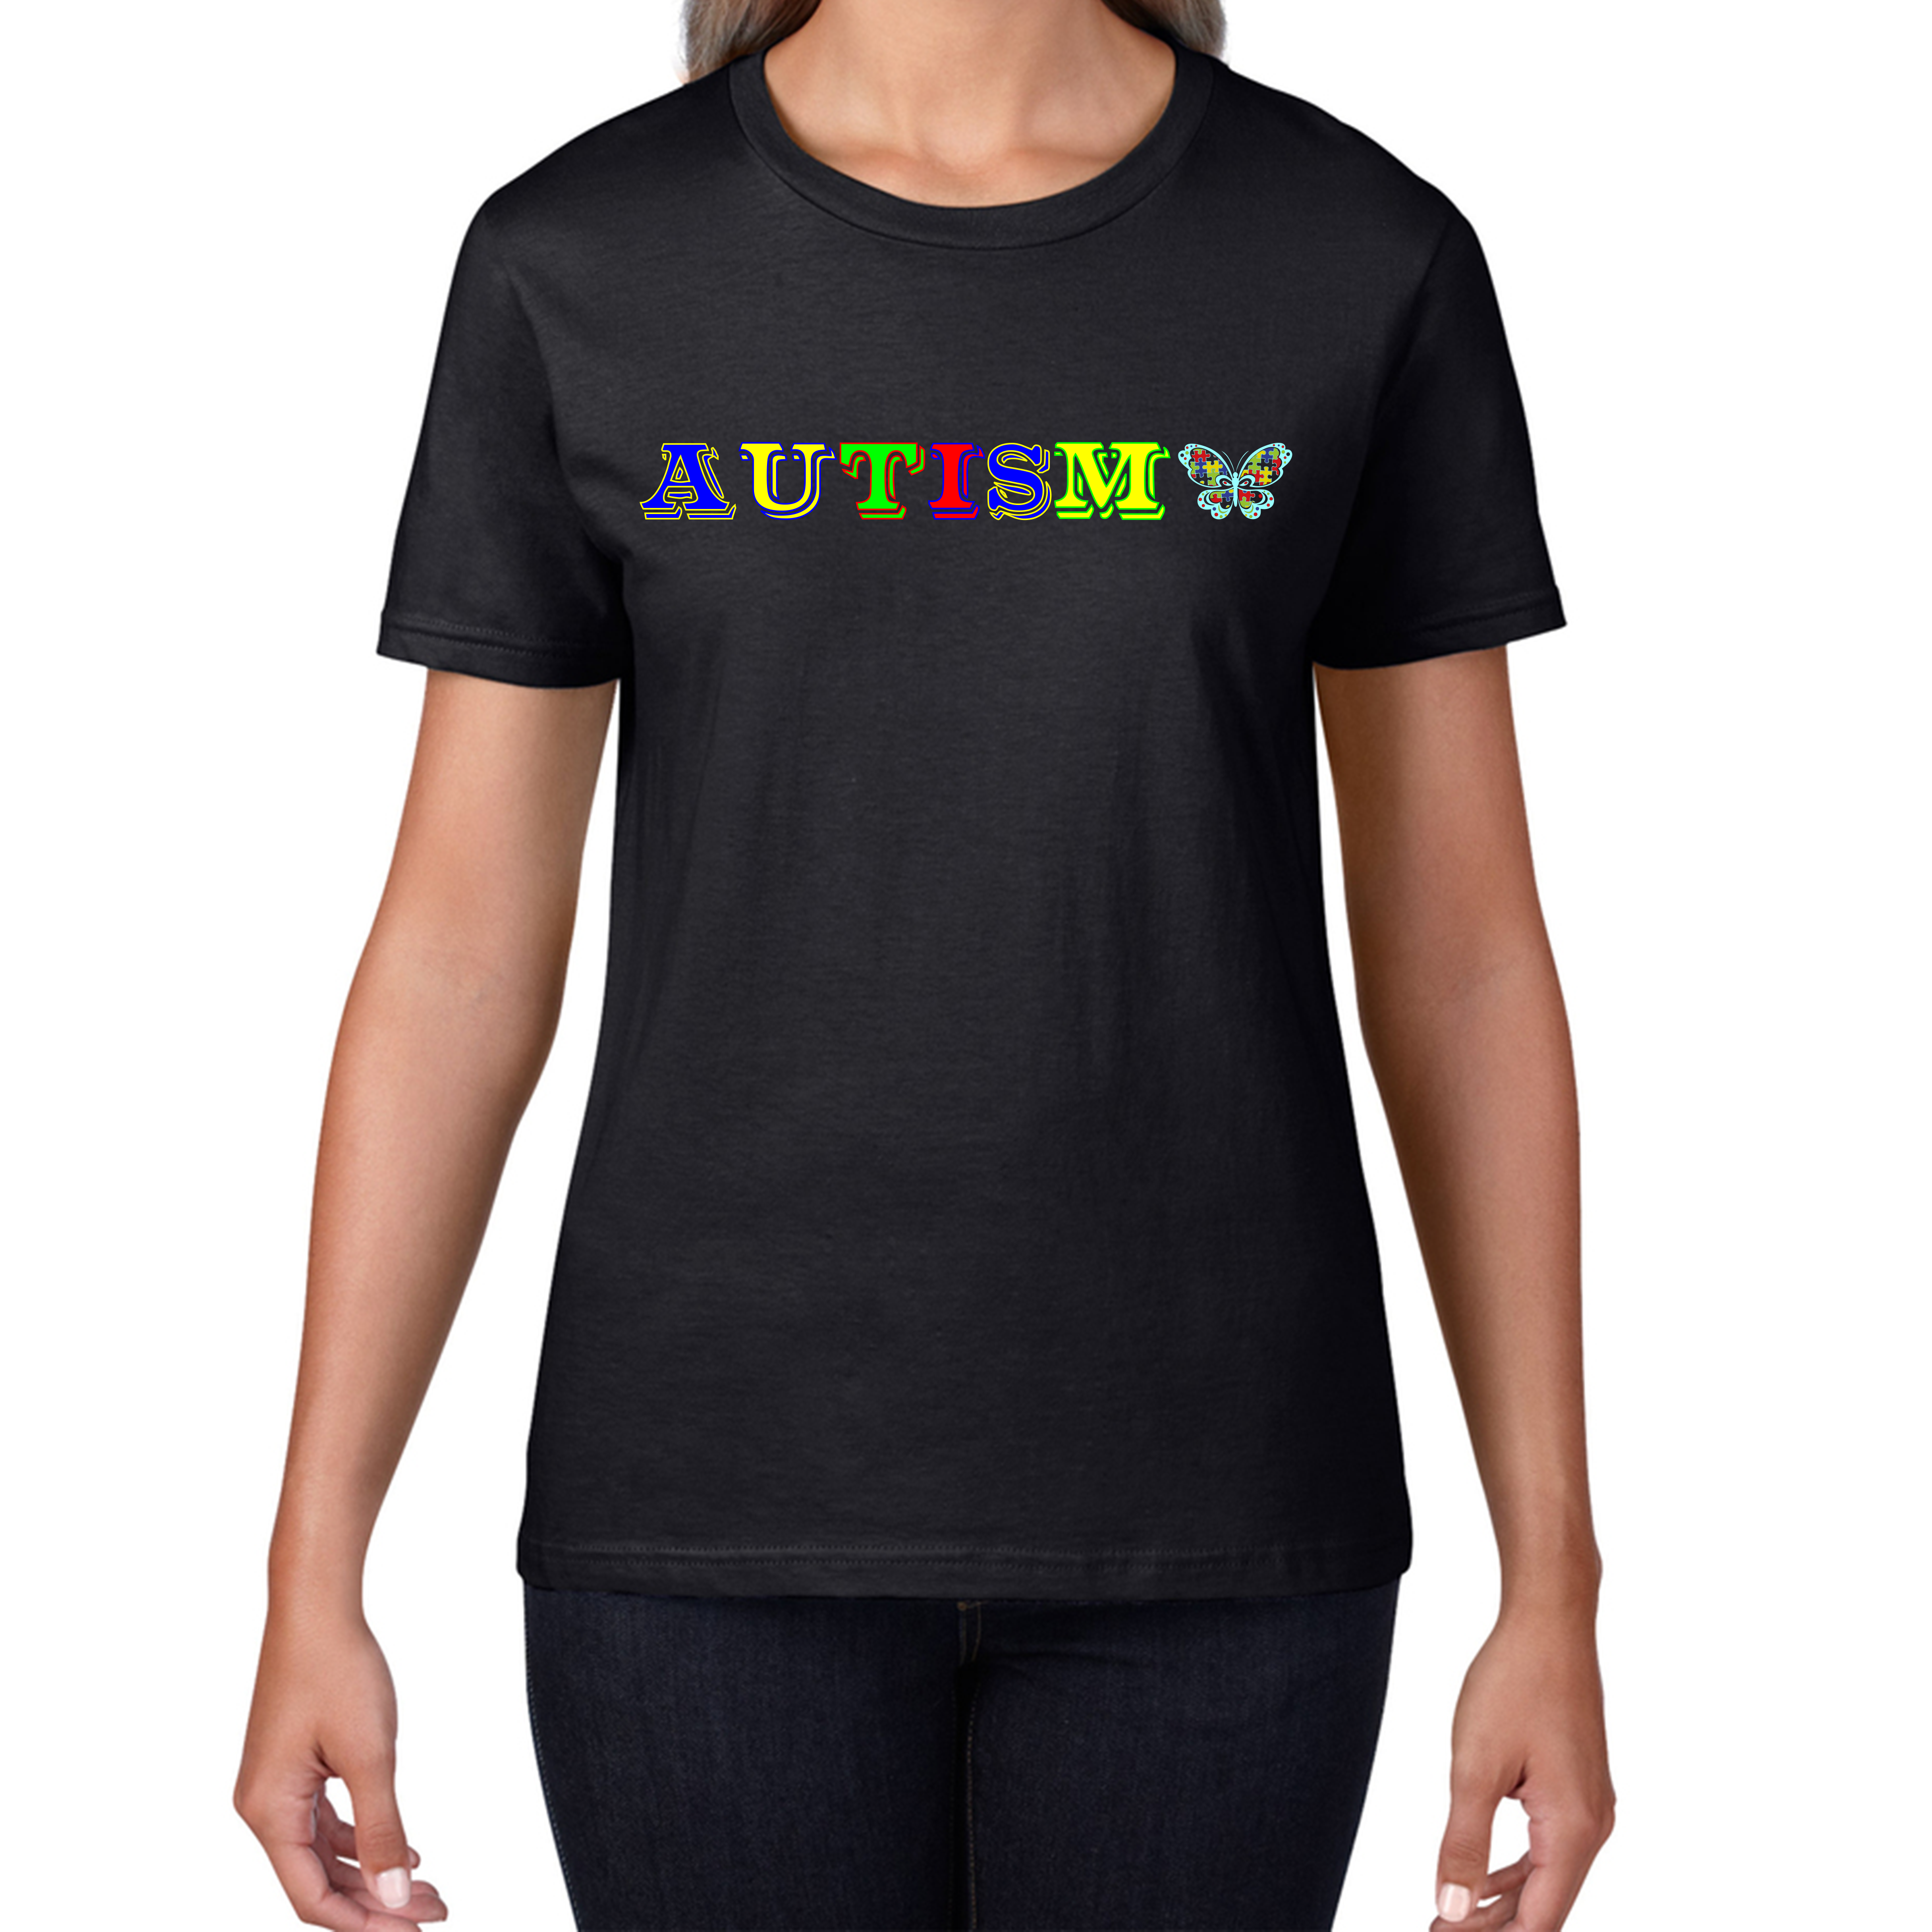 Autism Awareness With Butterfly Ladies T Shirt